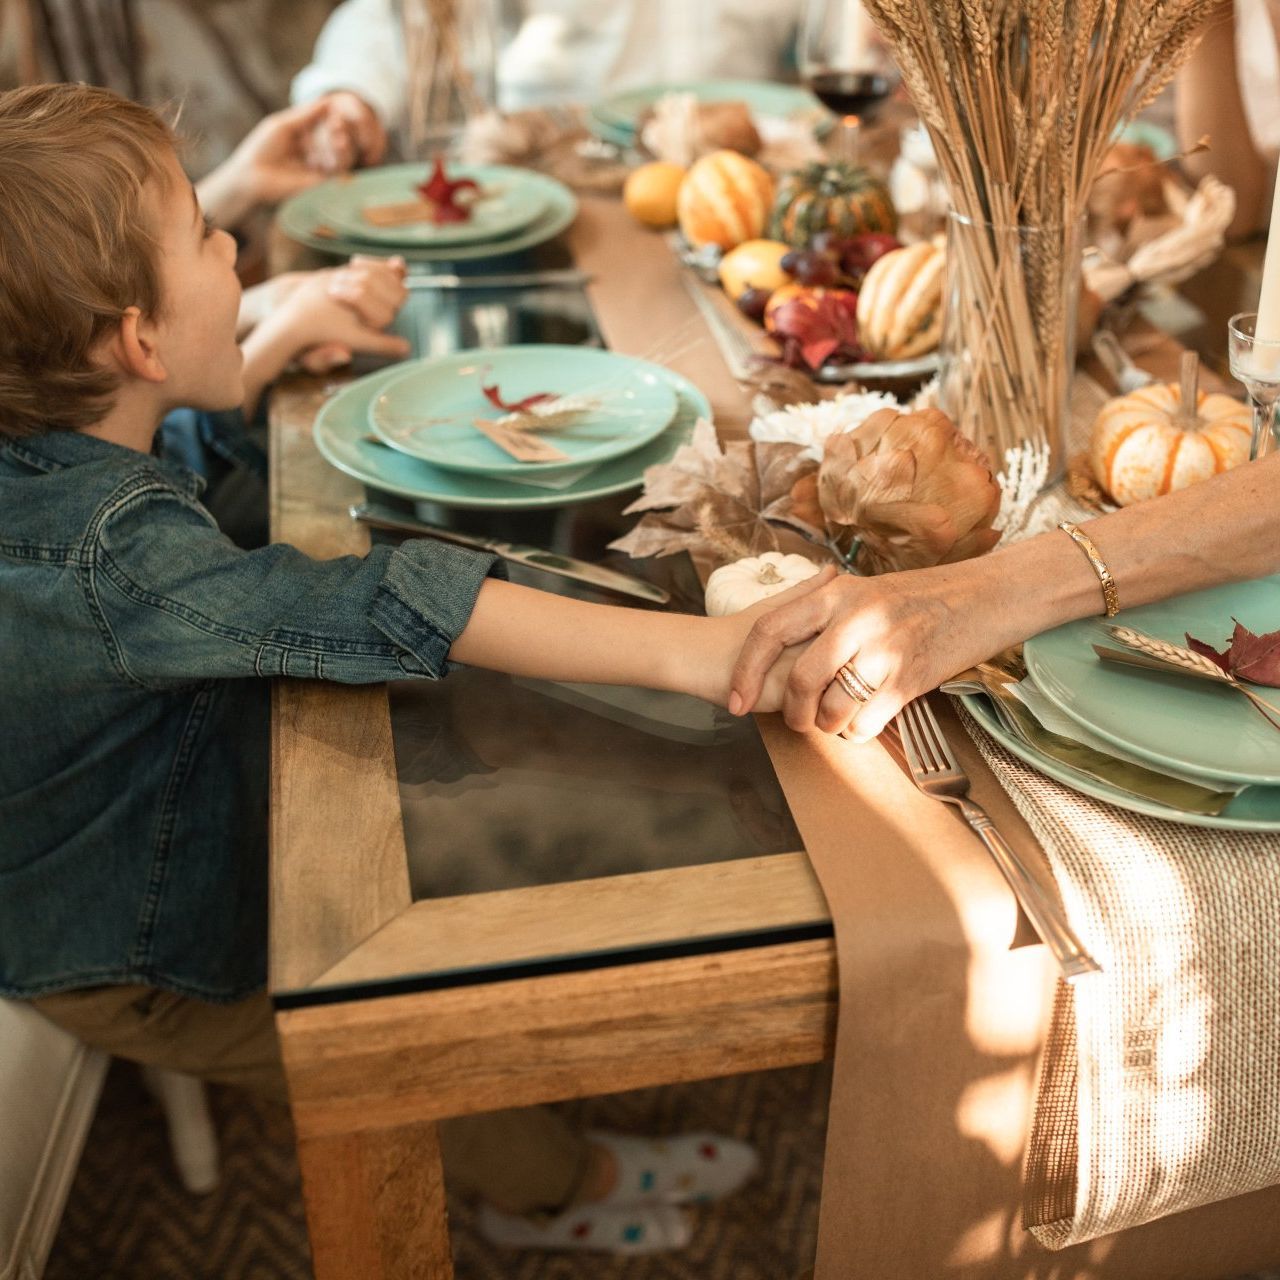 Image of child holding hands with elder at Thanksgiving meal.